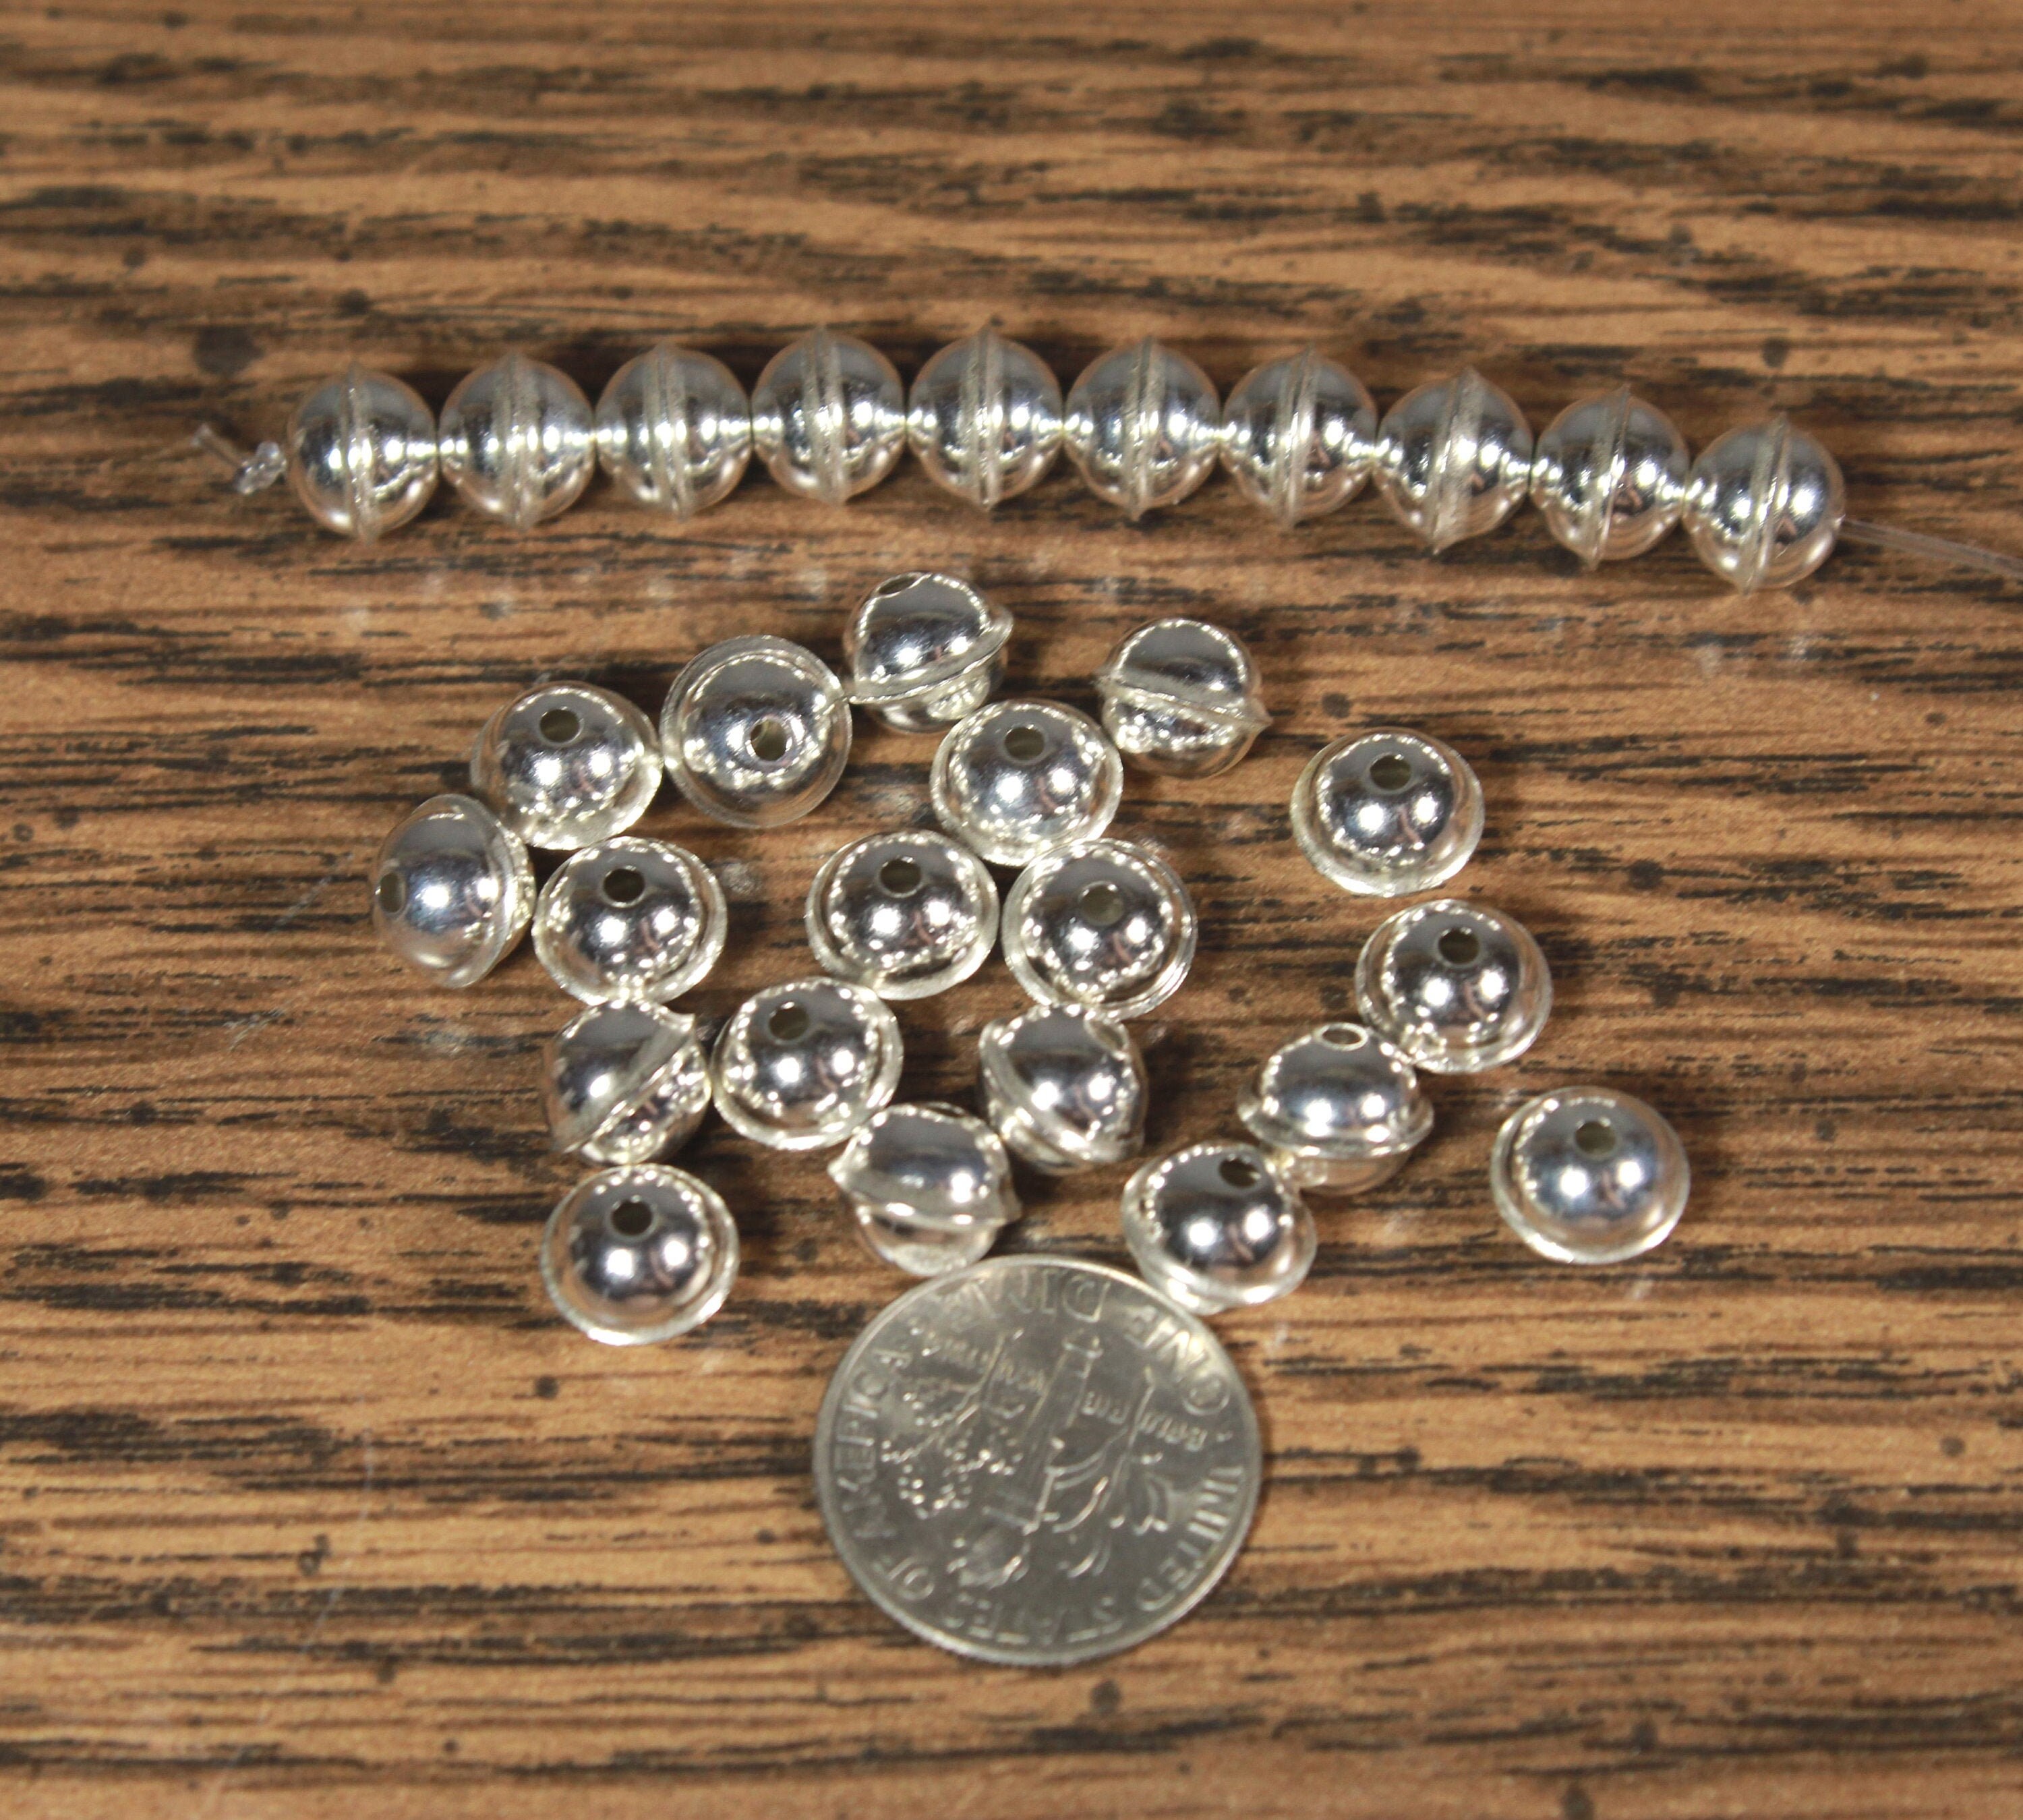 100 beads Sterling Silver Bench Made Beads 7mm pack of 100 beads DB2H-7 